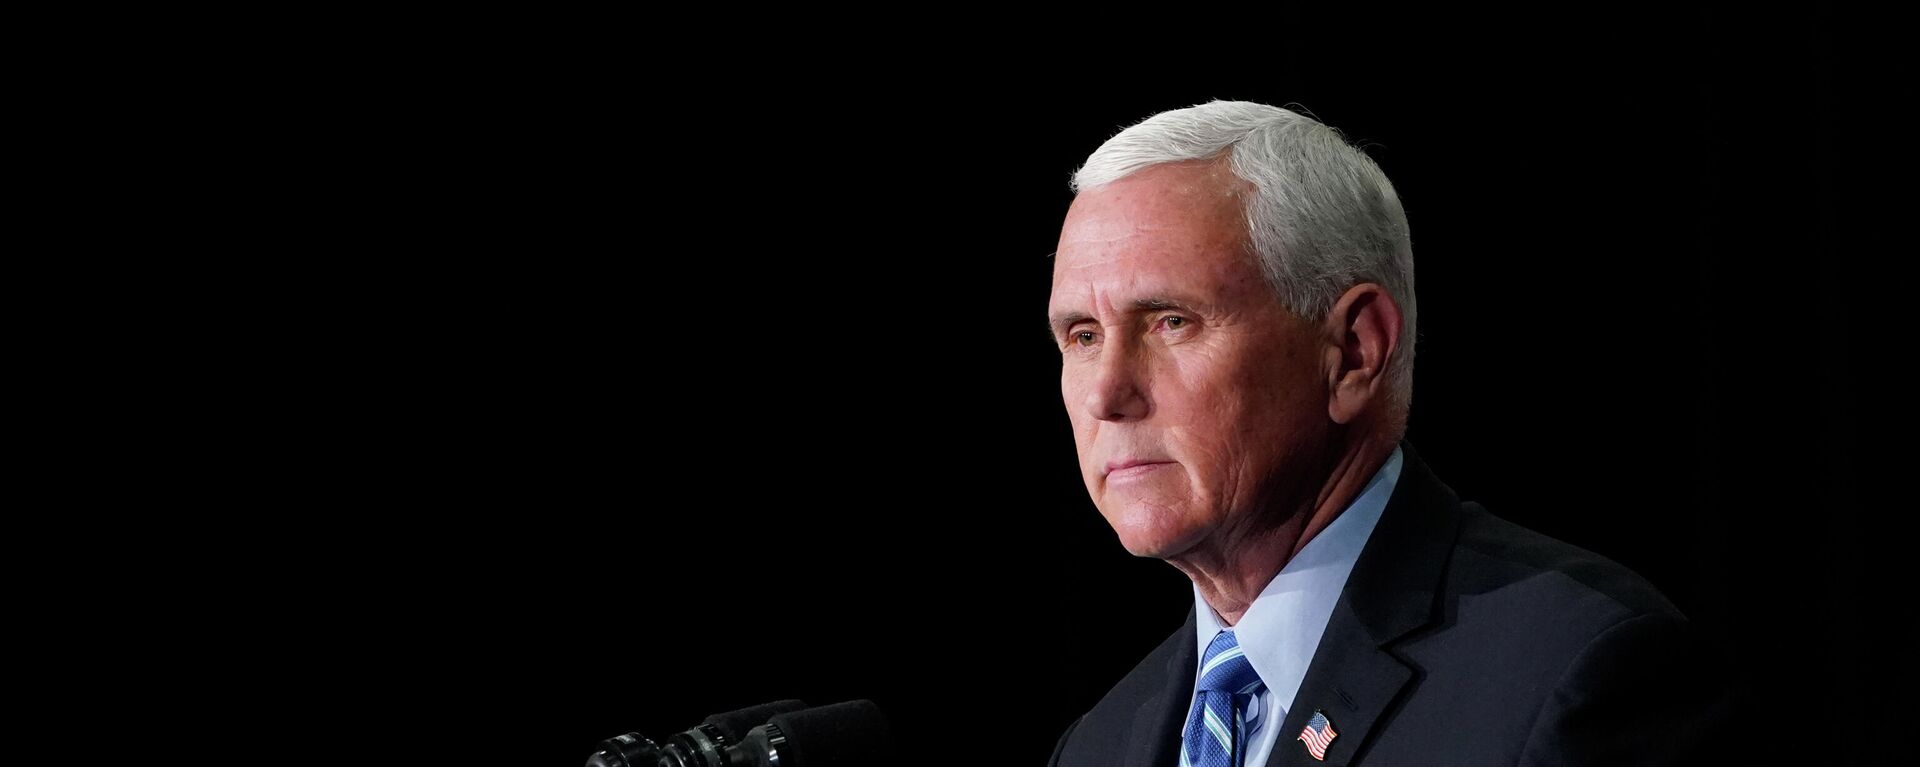 Former Vice President Mike Pence speaks about educational freedom at Patrick Henry College in Purcellville, Va., Thursday, Oct. 28, 2021. - Sputnik International, 1920, 02.02.2022